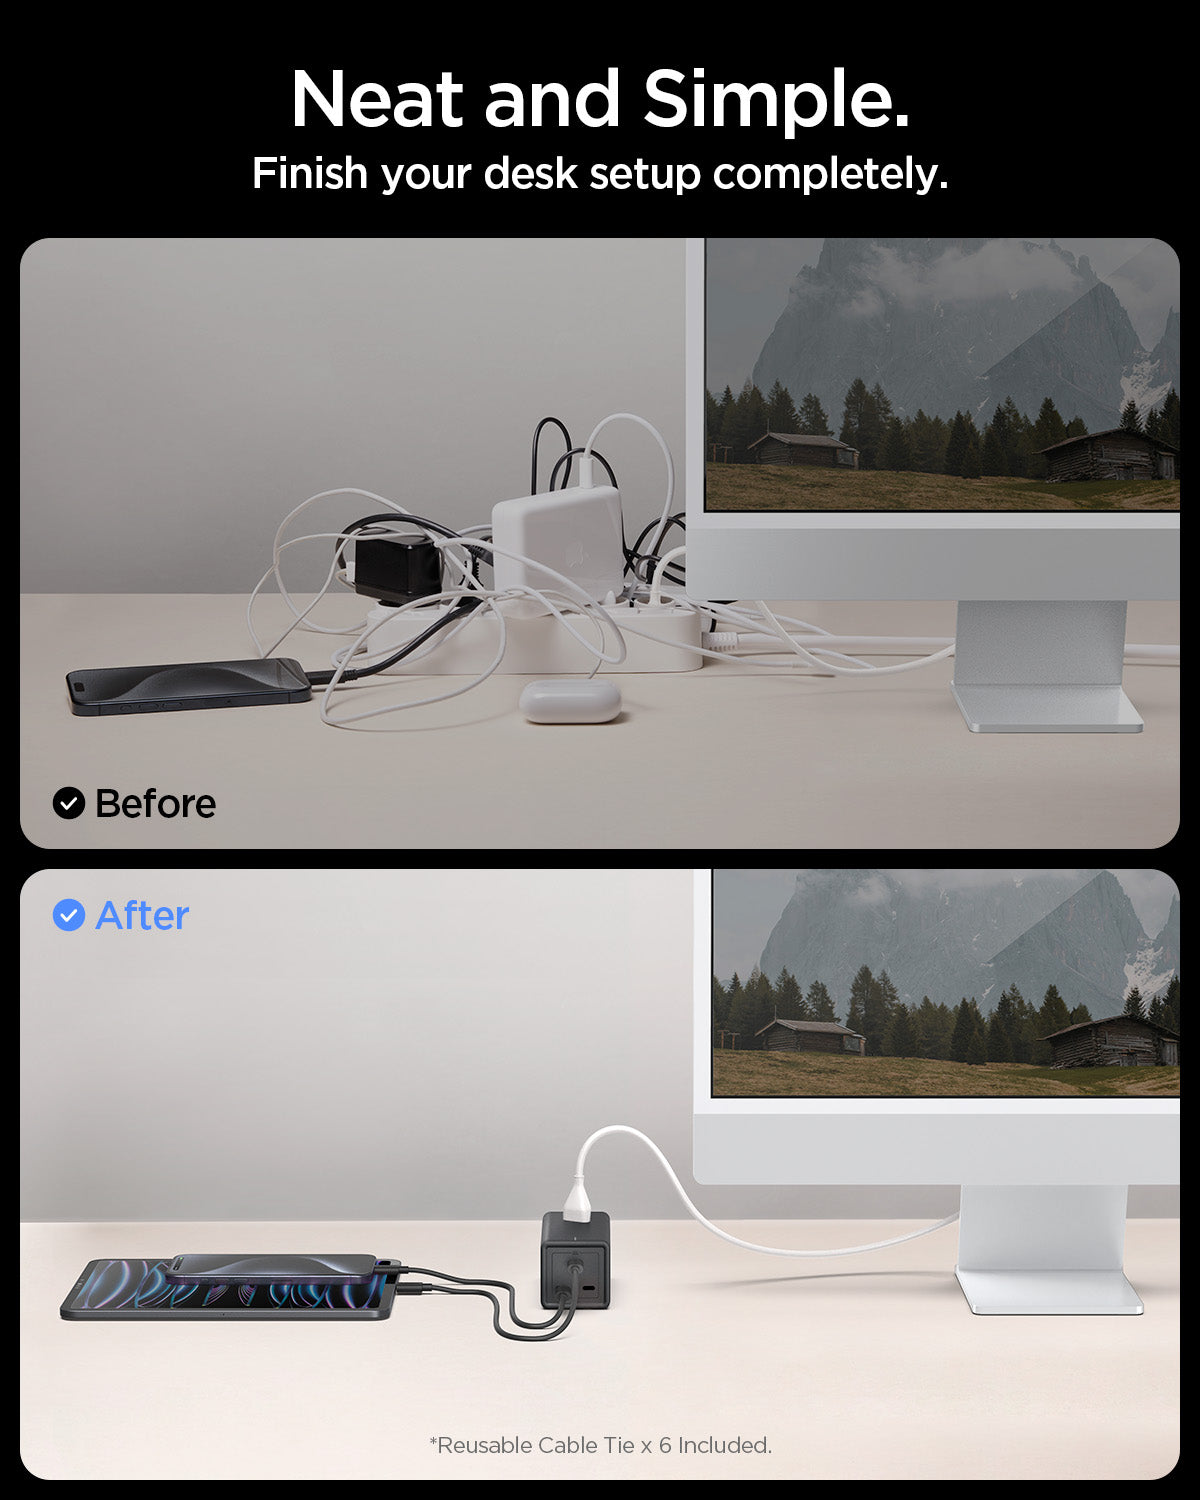 ACH05942 - ArcDock 70W Desktop Charger PD2102 in Black showing the neat and simple, finish your desk setup completely. showing the before and after